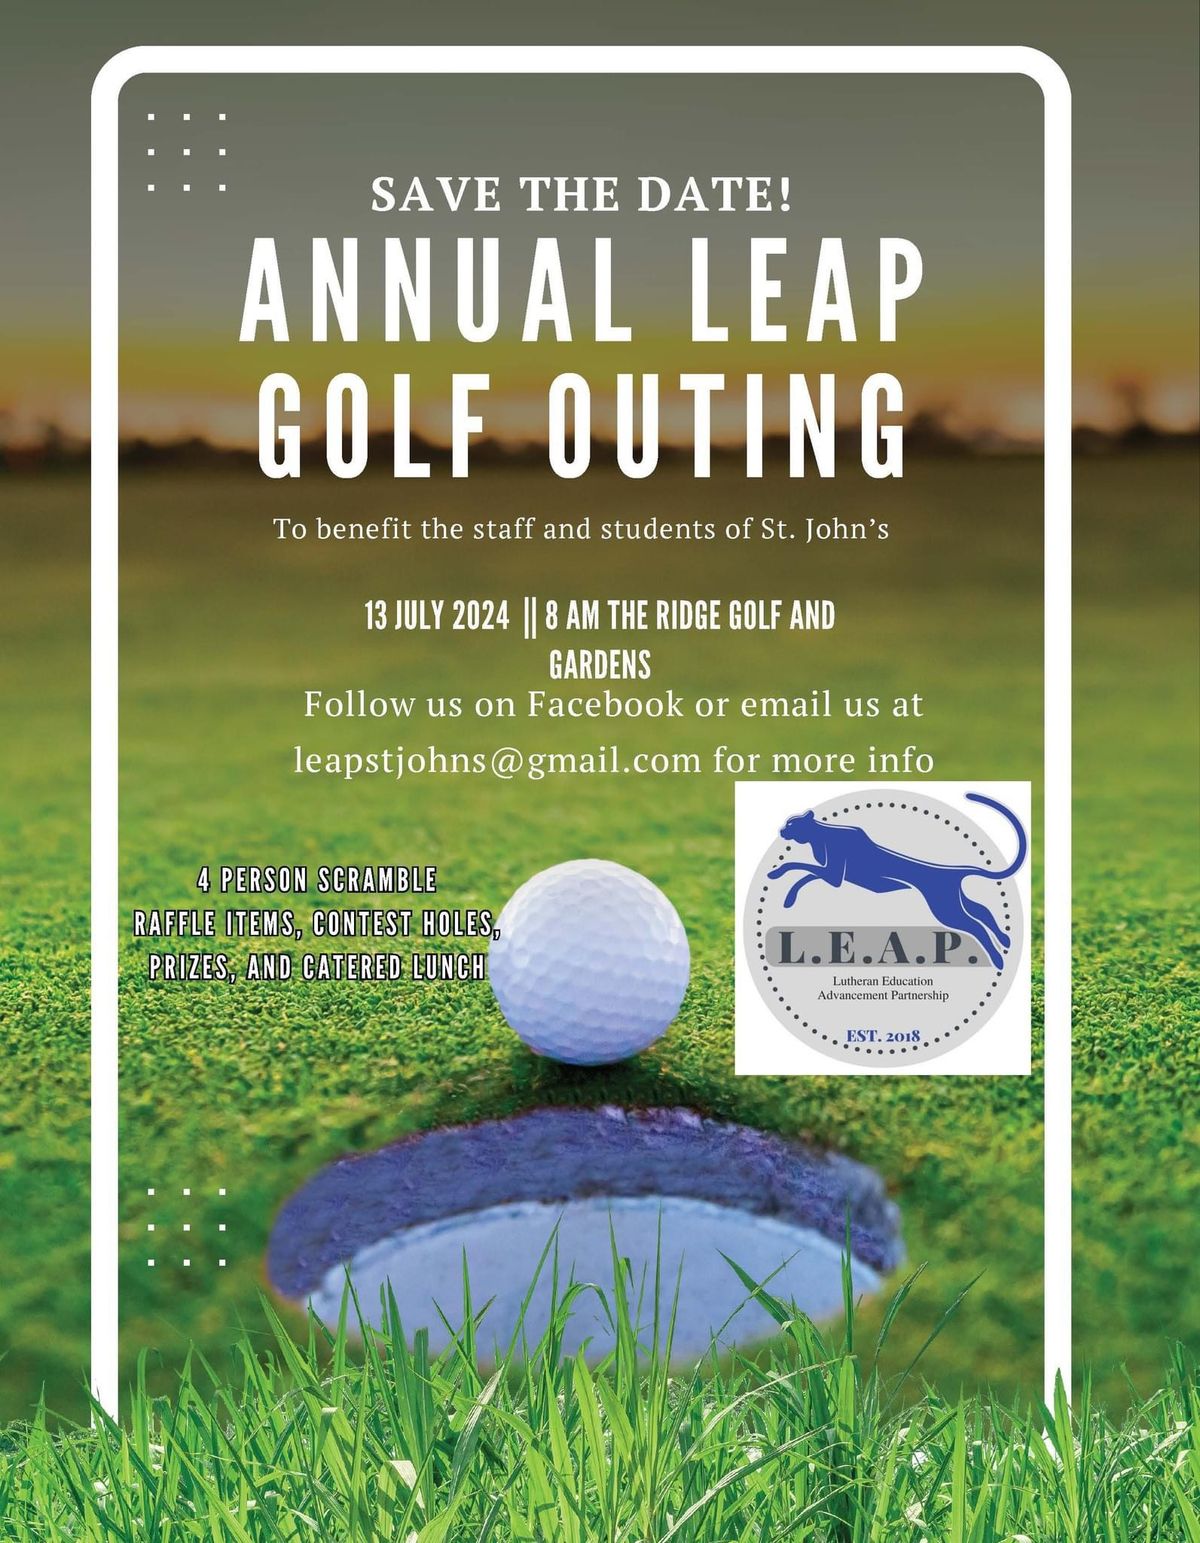 LEAP Annual Golf Outing